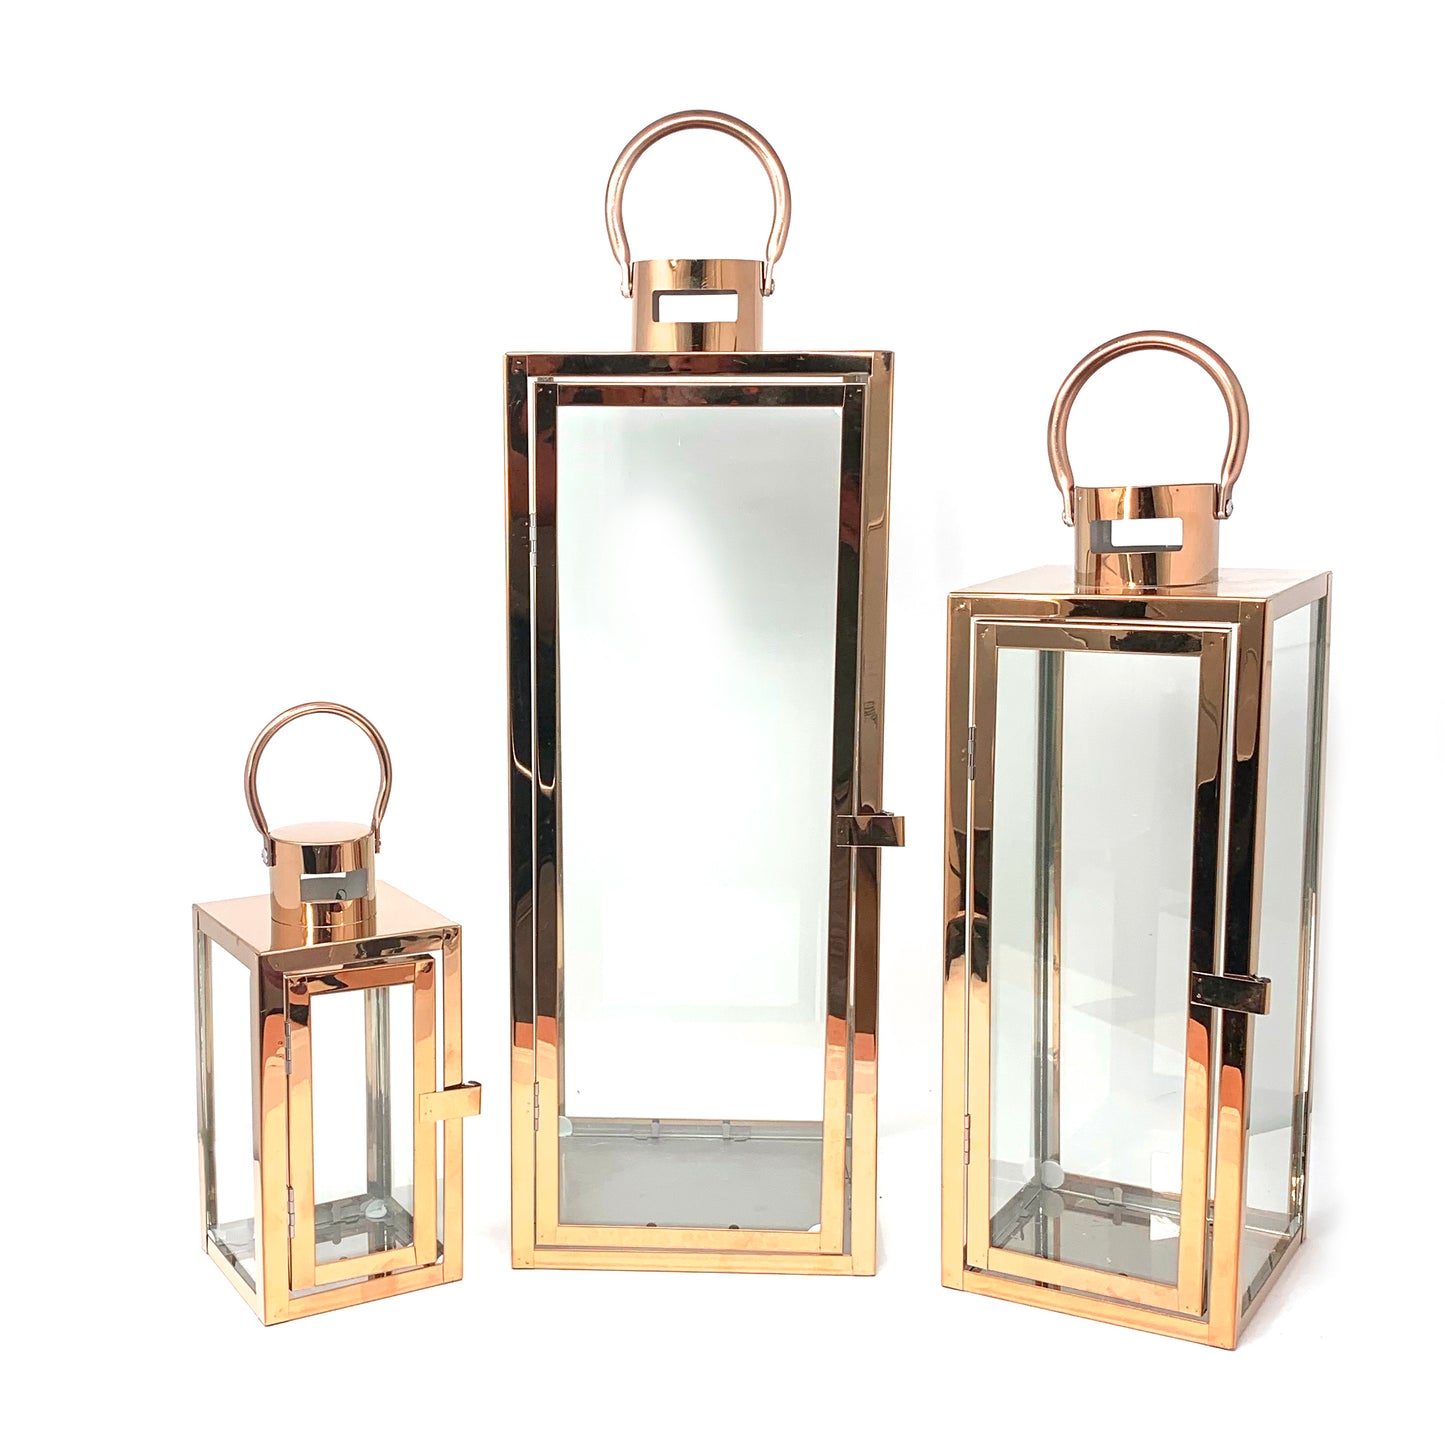 Allgala Lanterns 3-PC Set Jumbo Luxury Modern Indoor/Outdoor Hurricane Candle Lantern Set with Chrome Plated Structure and Tempered Glass-Cuboid